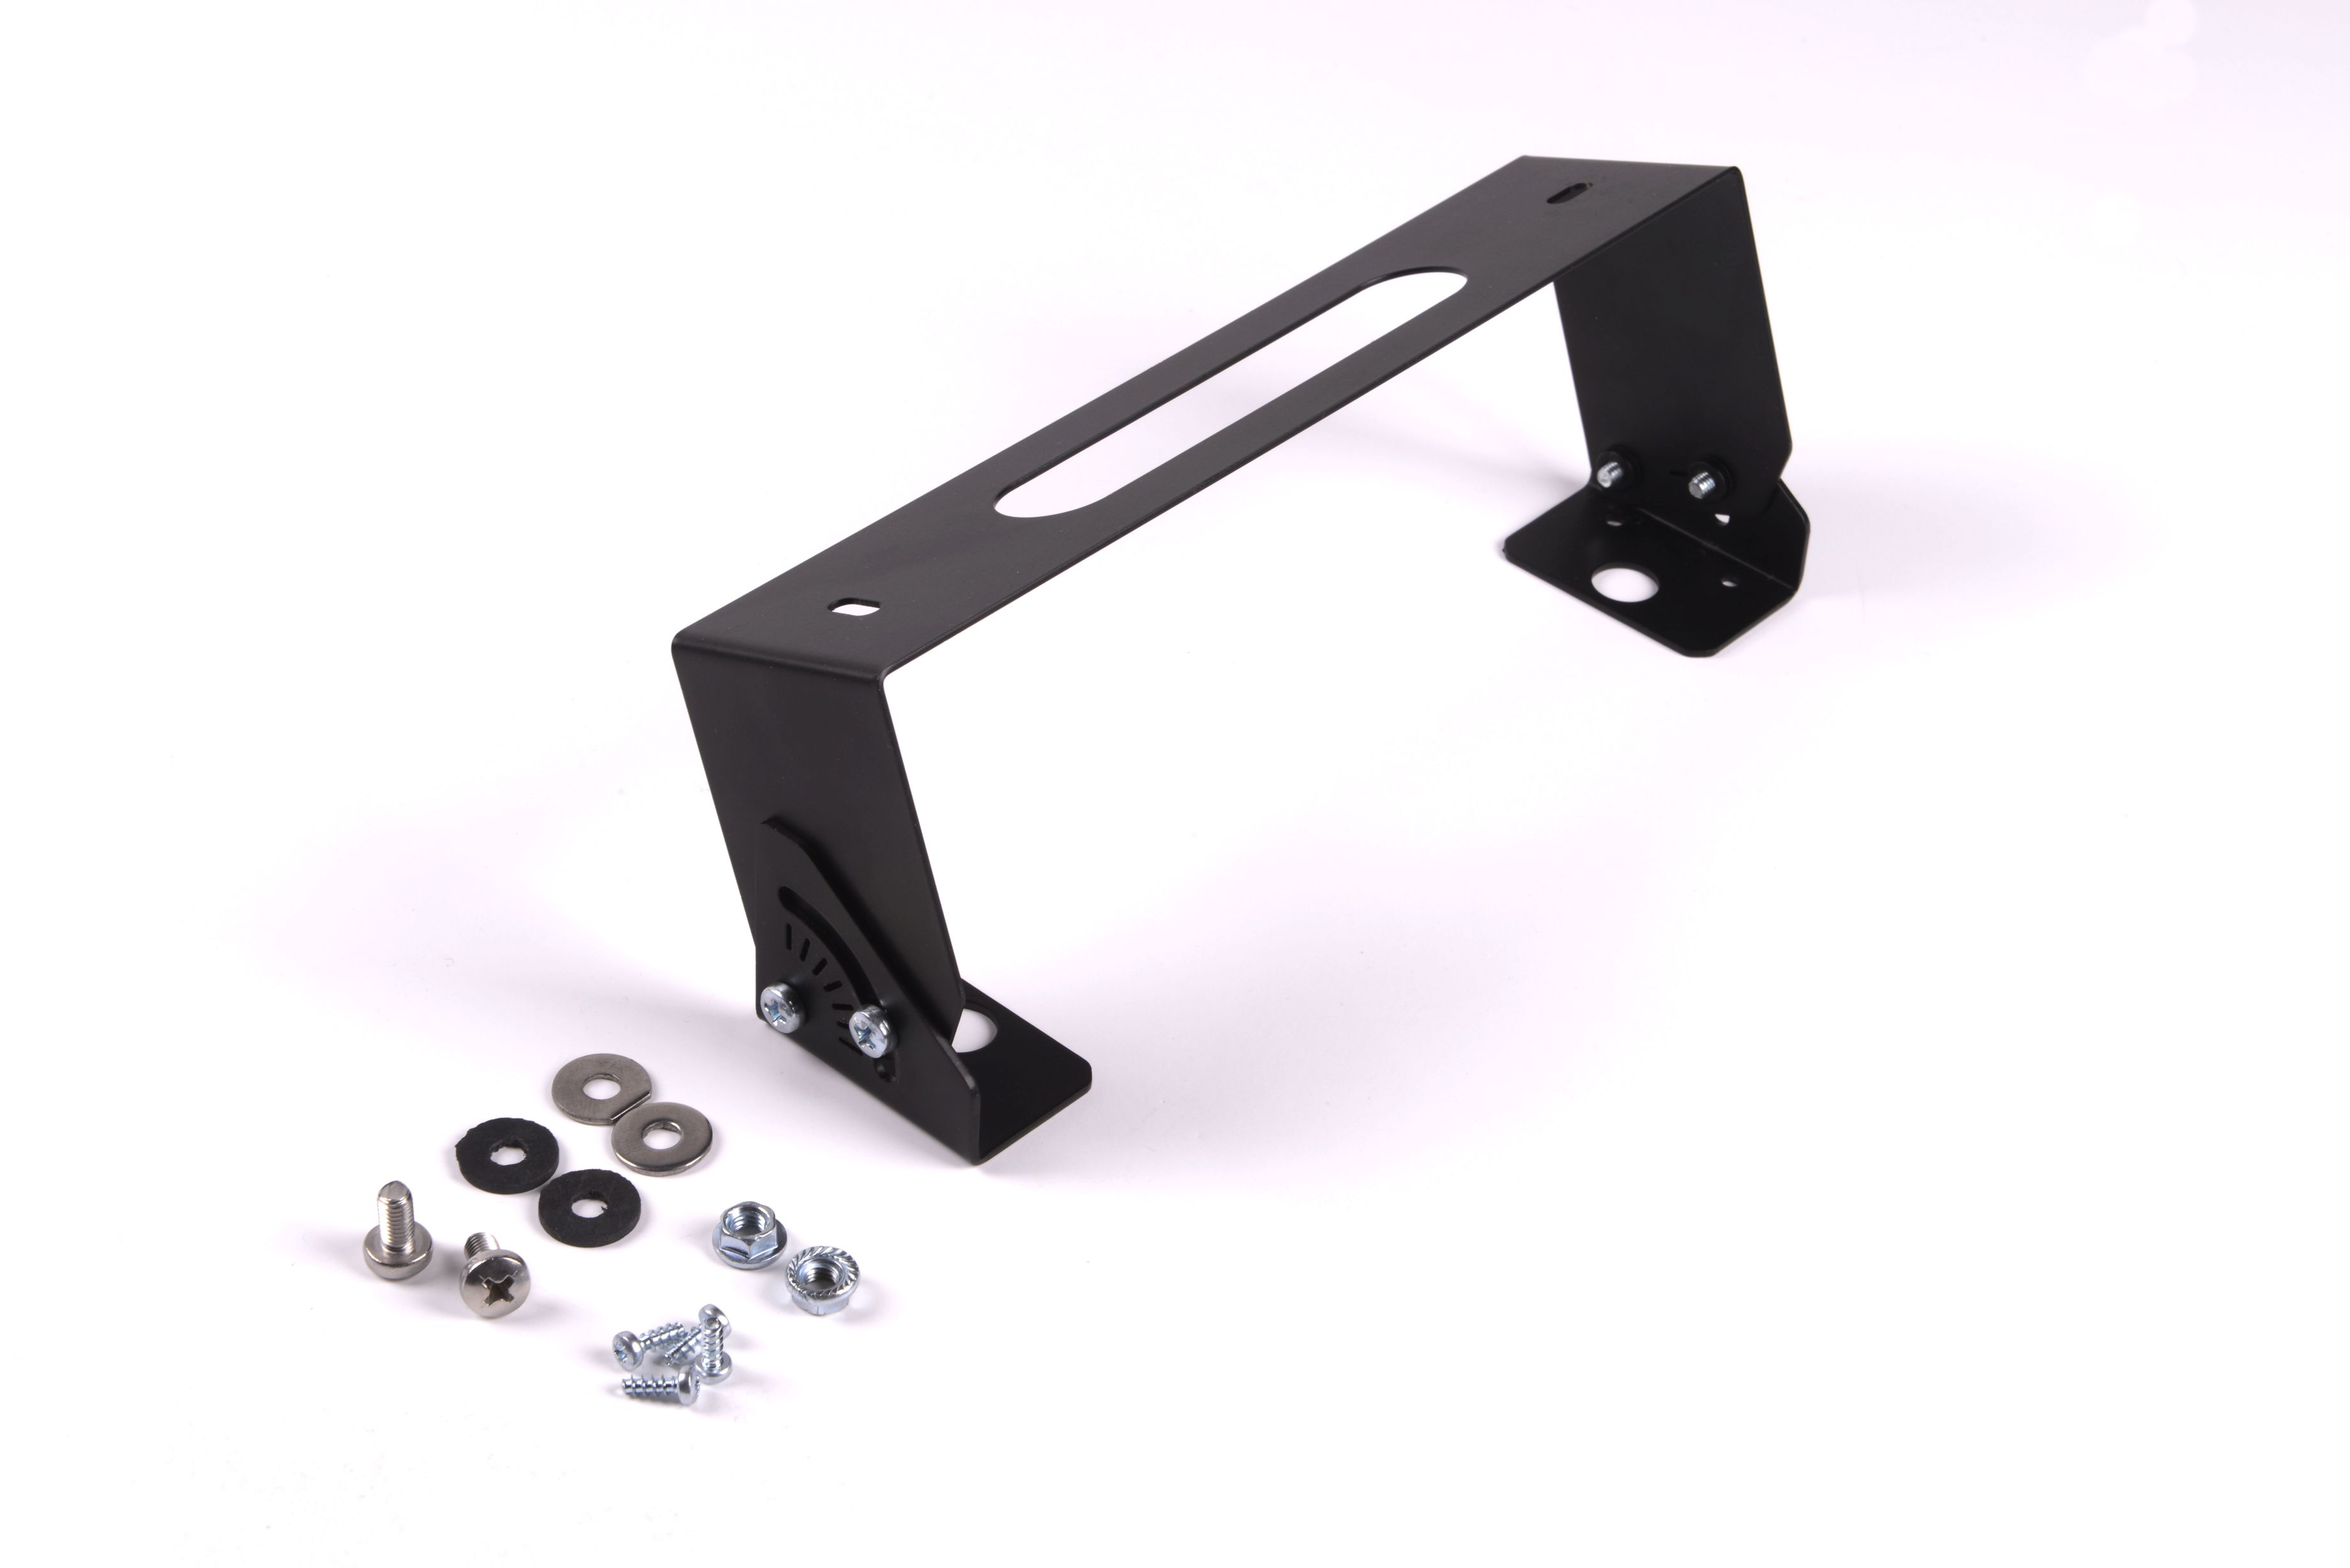 Angle 0˚- 90˚ mounting support for Vella / Orion